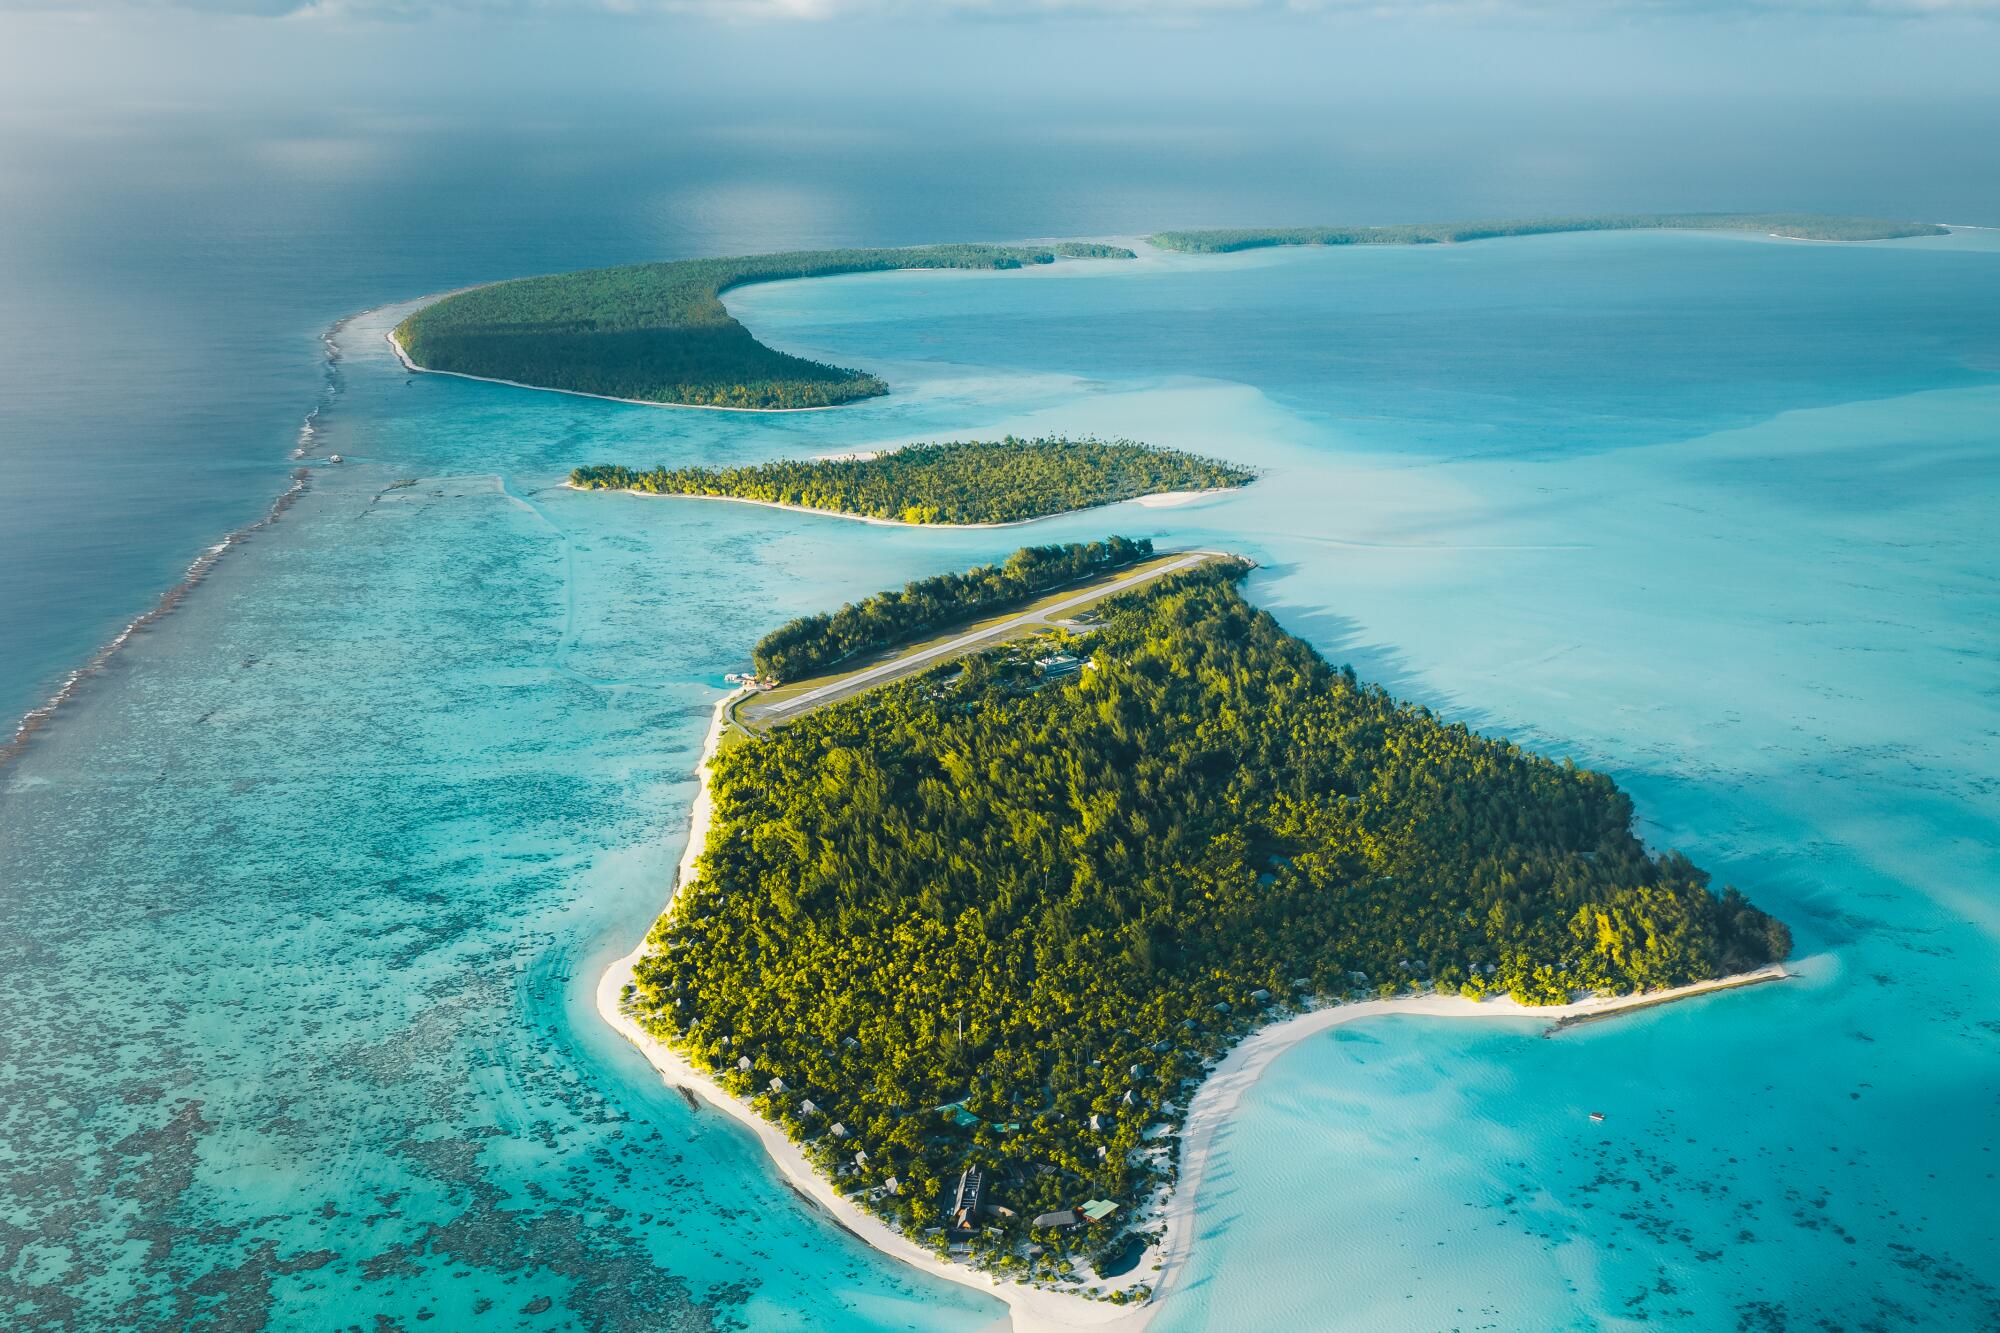 An atoll covered in greenery, in turquoise ocean waters under a sky with puffy white clouds